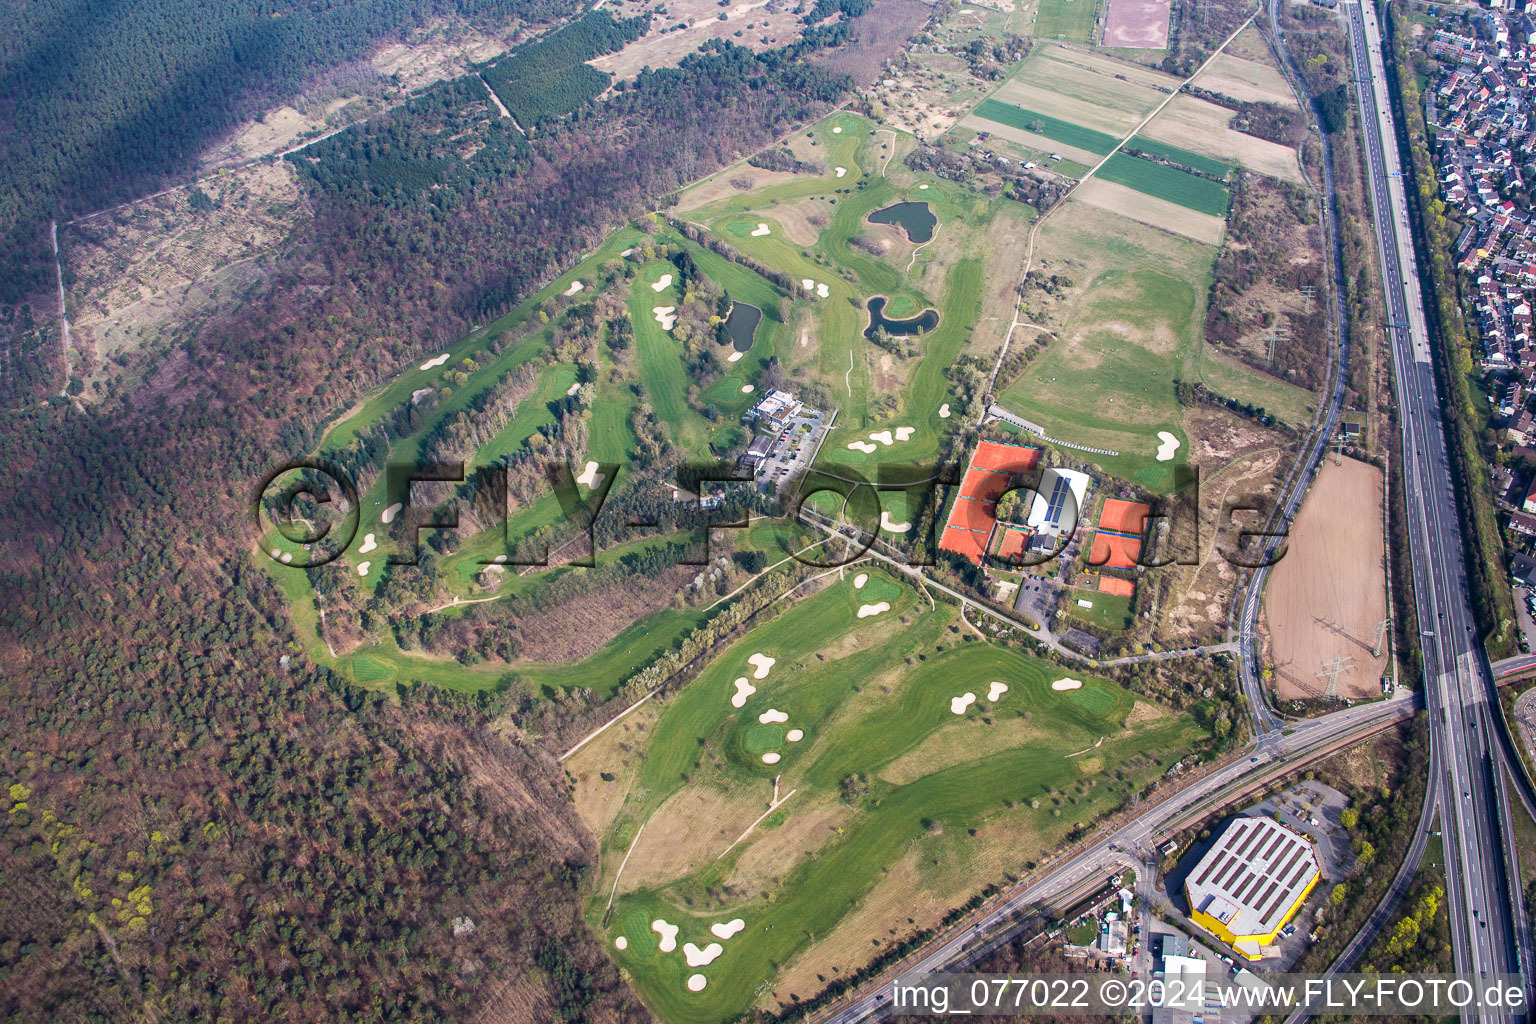 Aerial view of Grounds of the Golf course at of Golf Club Mannheim-Viernheim 1930 e.V. in Viernheim in the state Hesse, Germany